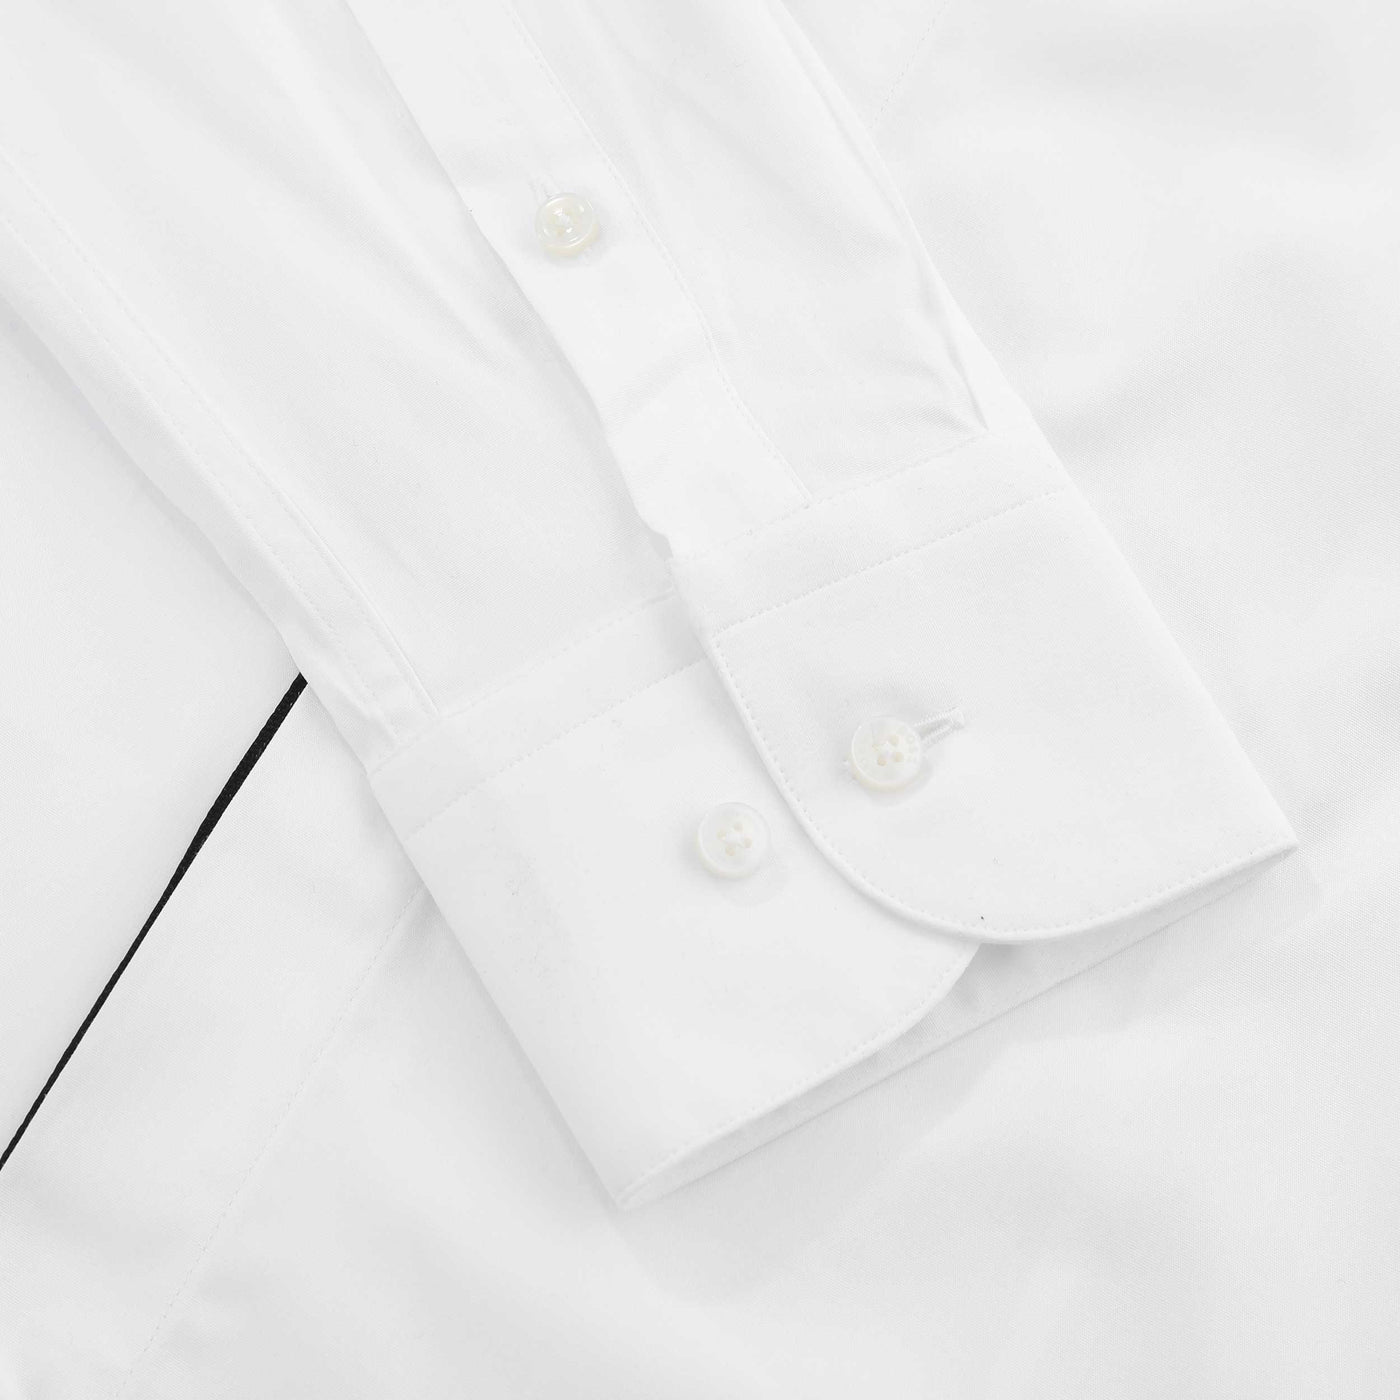 BOSS H Hank Party2 221 Shirt in White Cuff